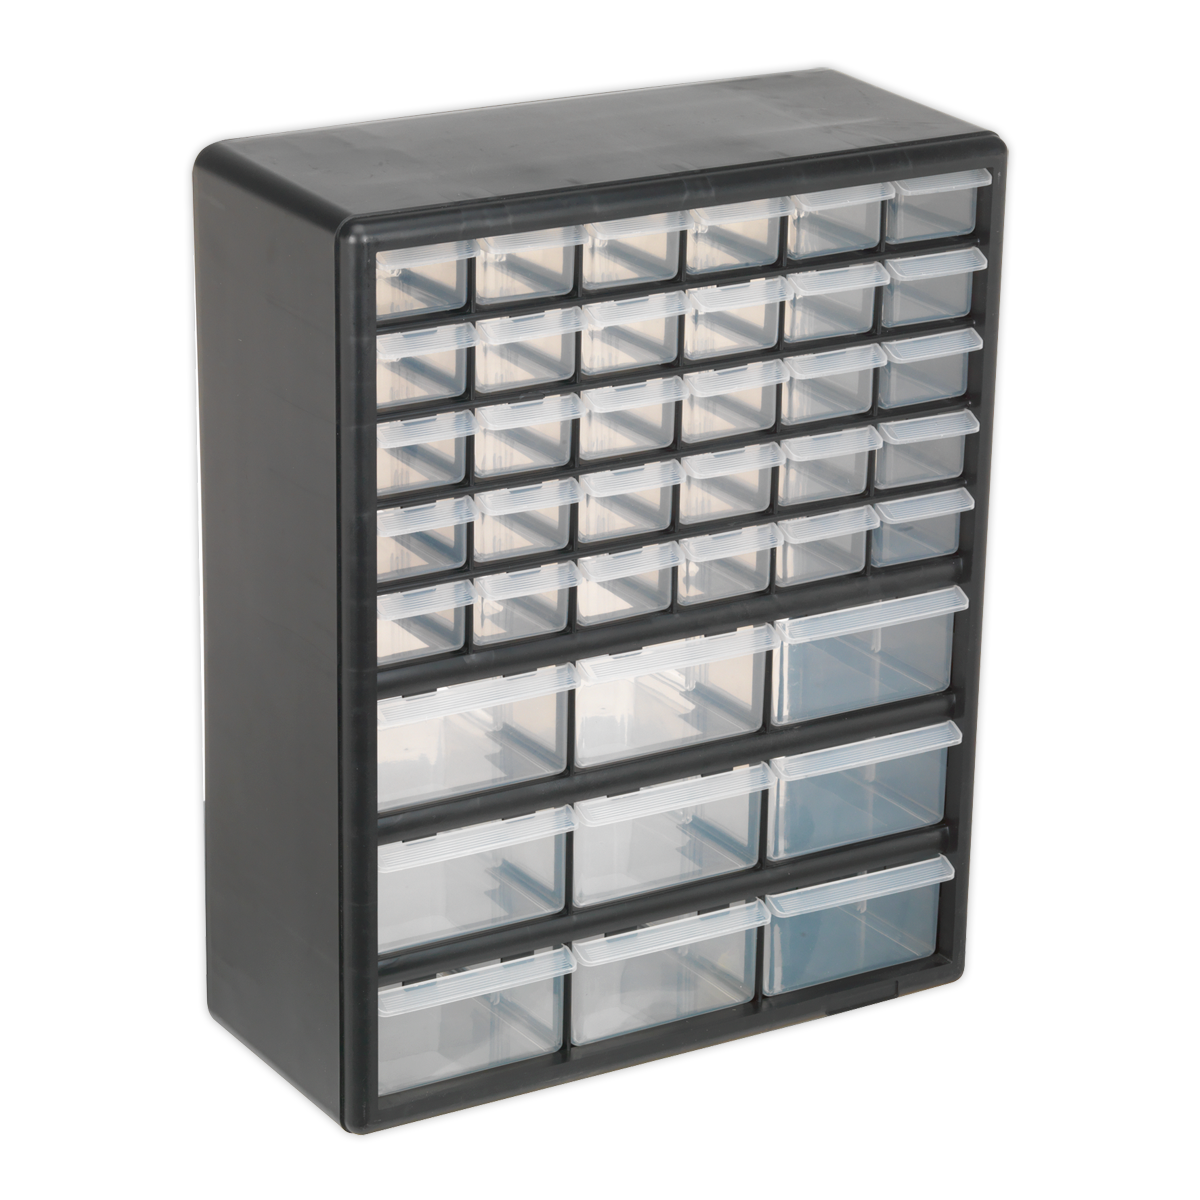 SEALEY - APDC39 Cabinet Box 39 Drawer